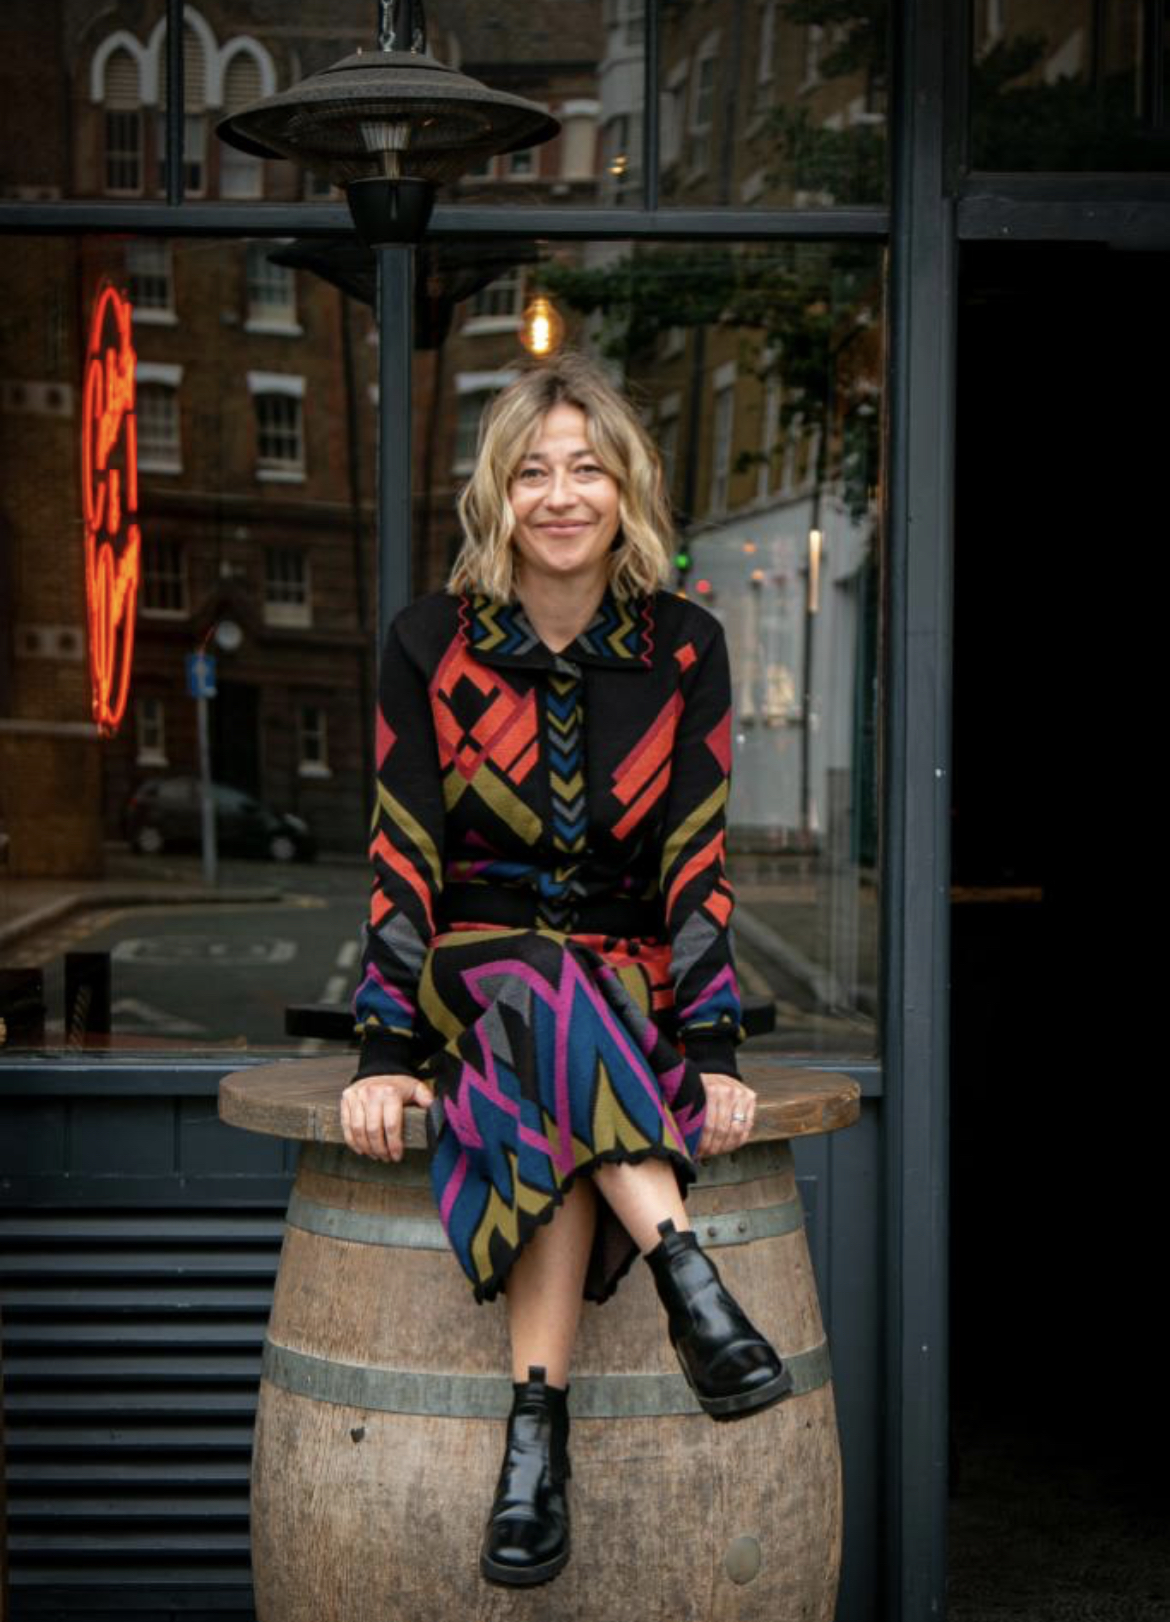 A woman in a colorful patterned outfit sits on a wooden barrel outside a cafe, smiling, with a neon sign visible through the window behind her.